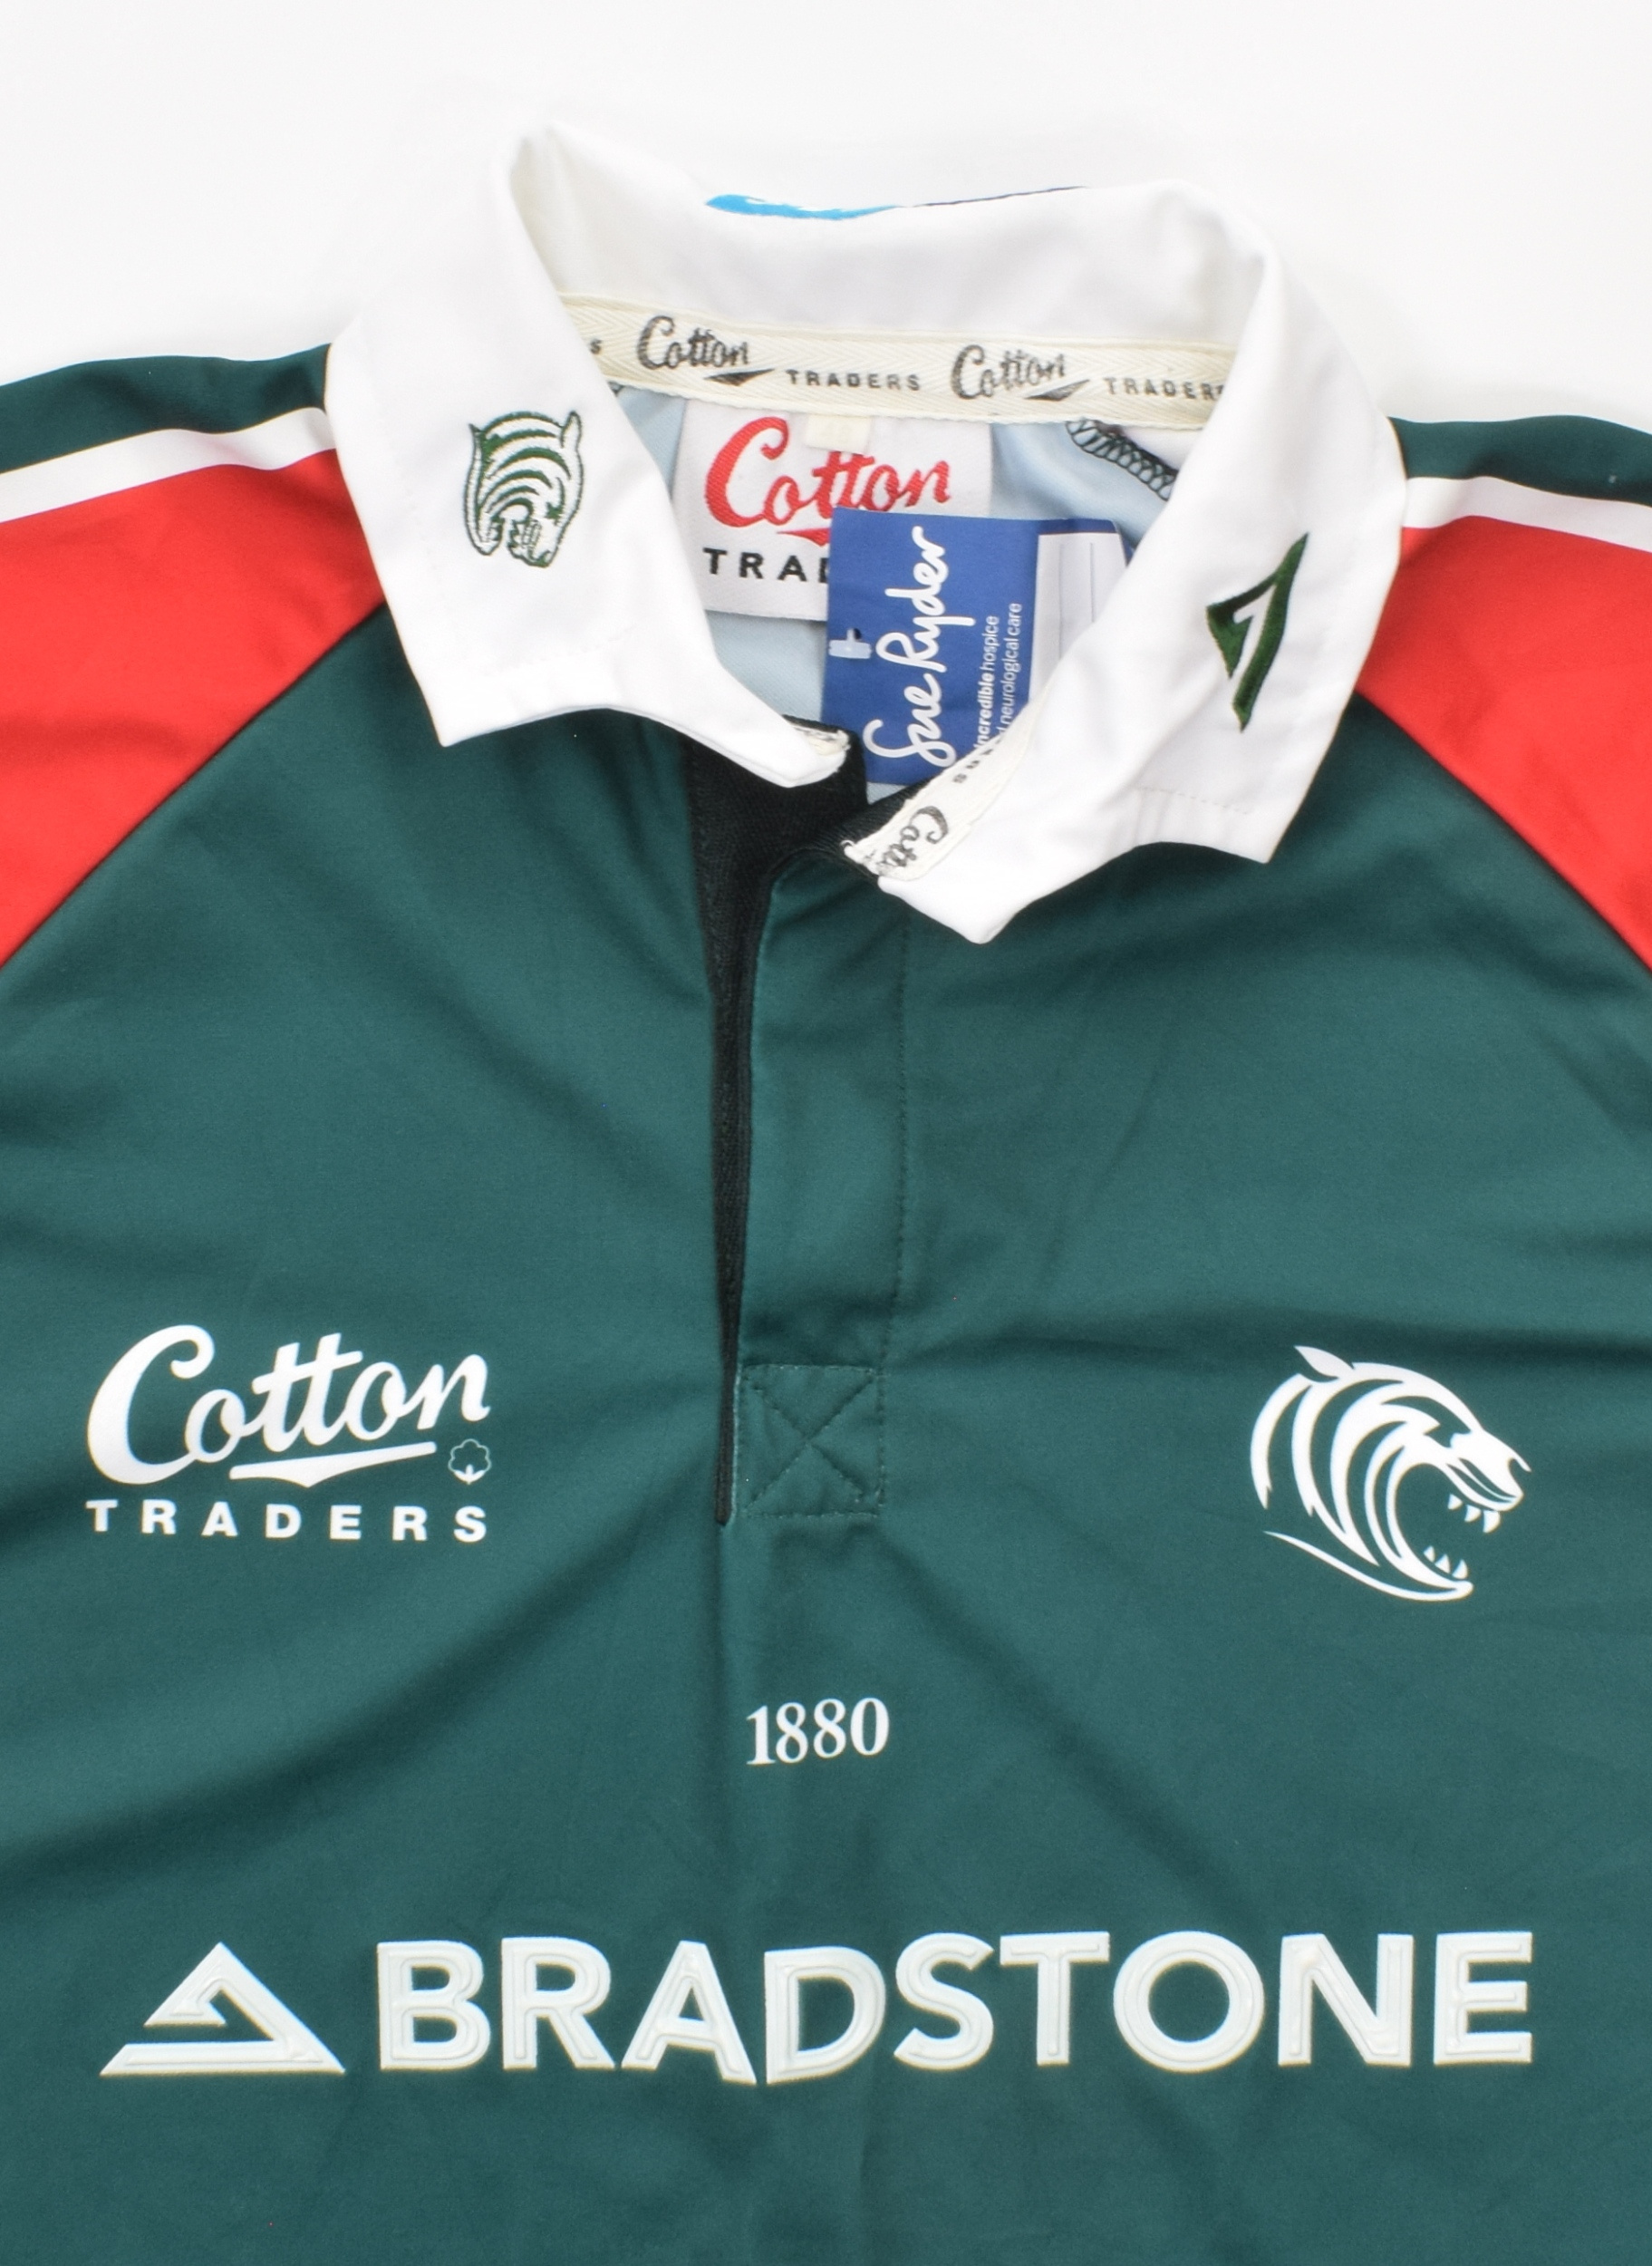 LEICESTER TIGERS RUGBY JERSEY COTTON TRADERS SIZE L